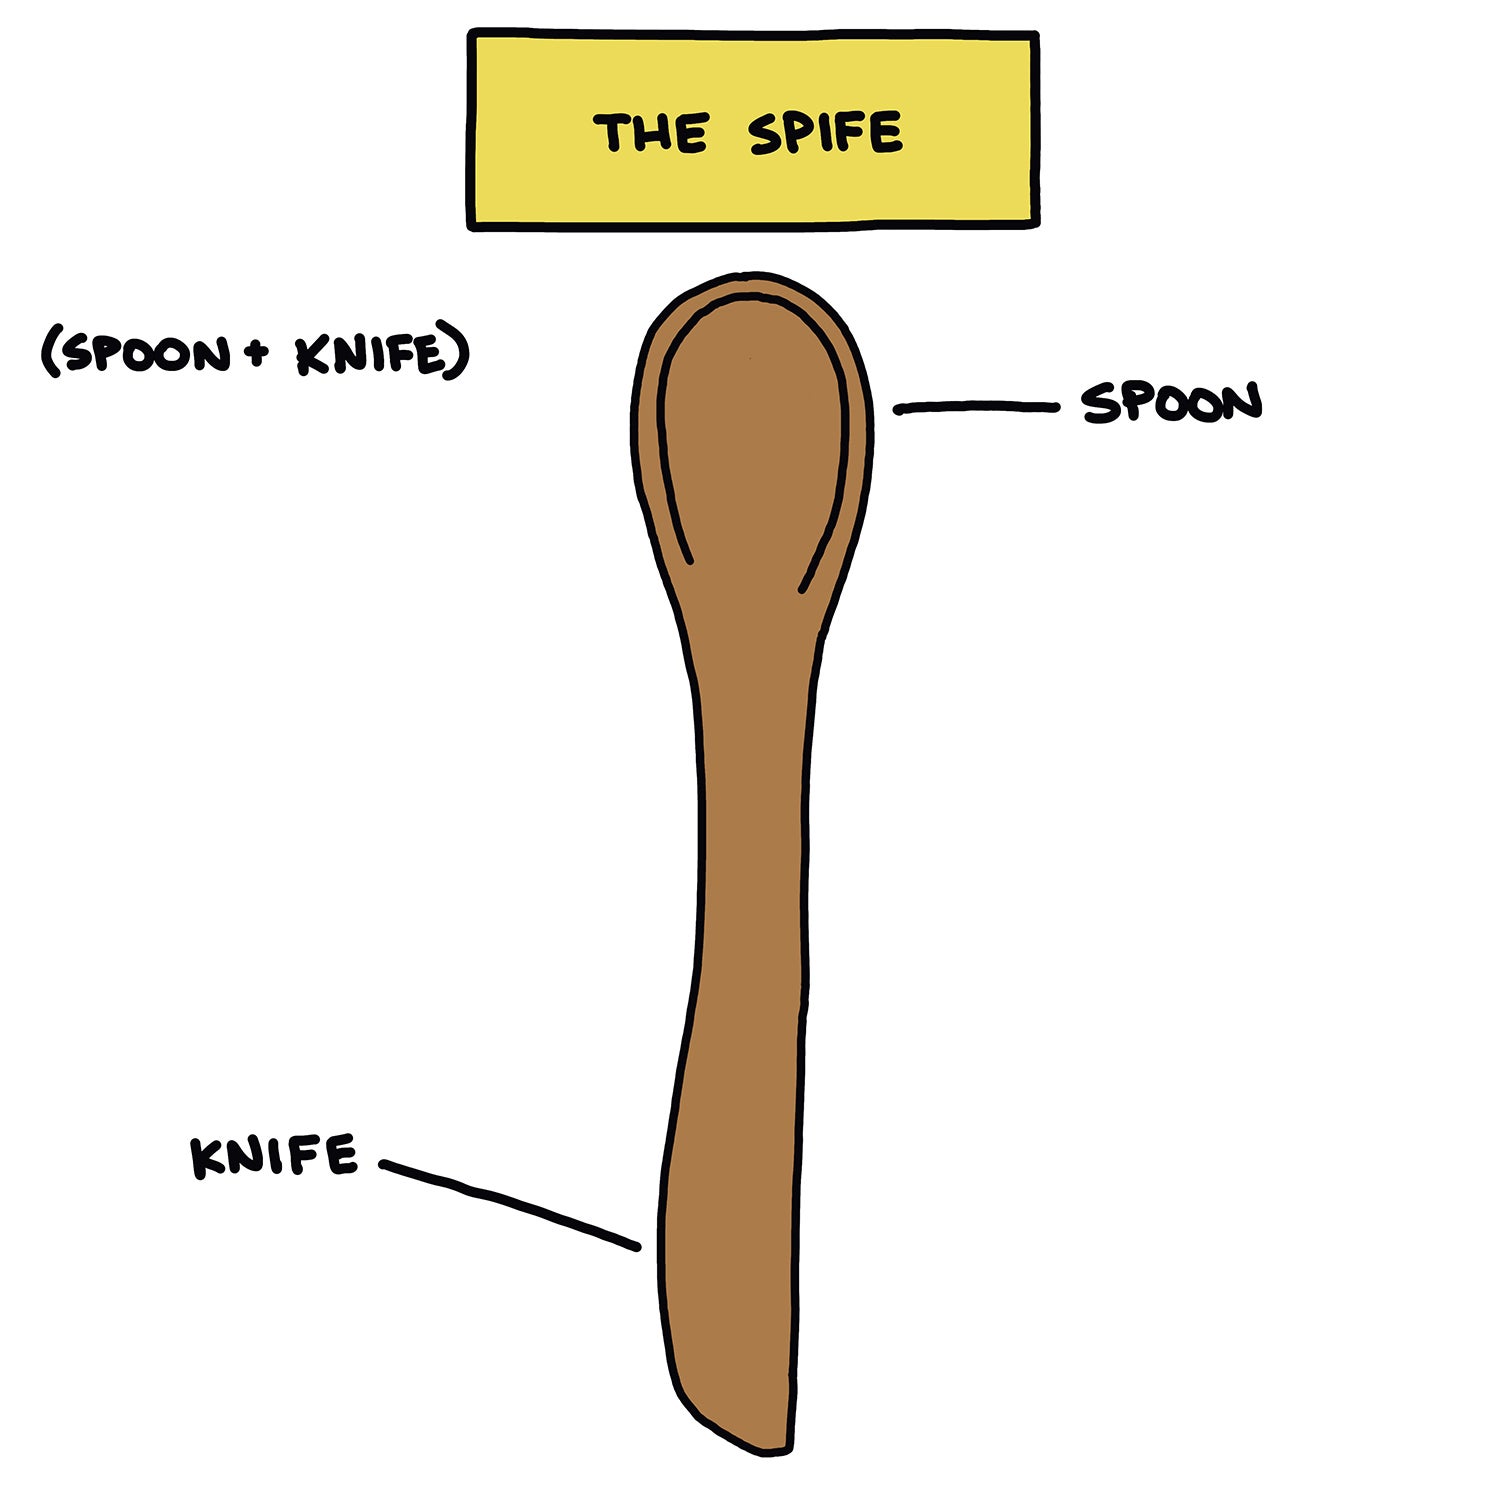 The Spife